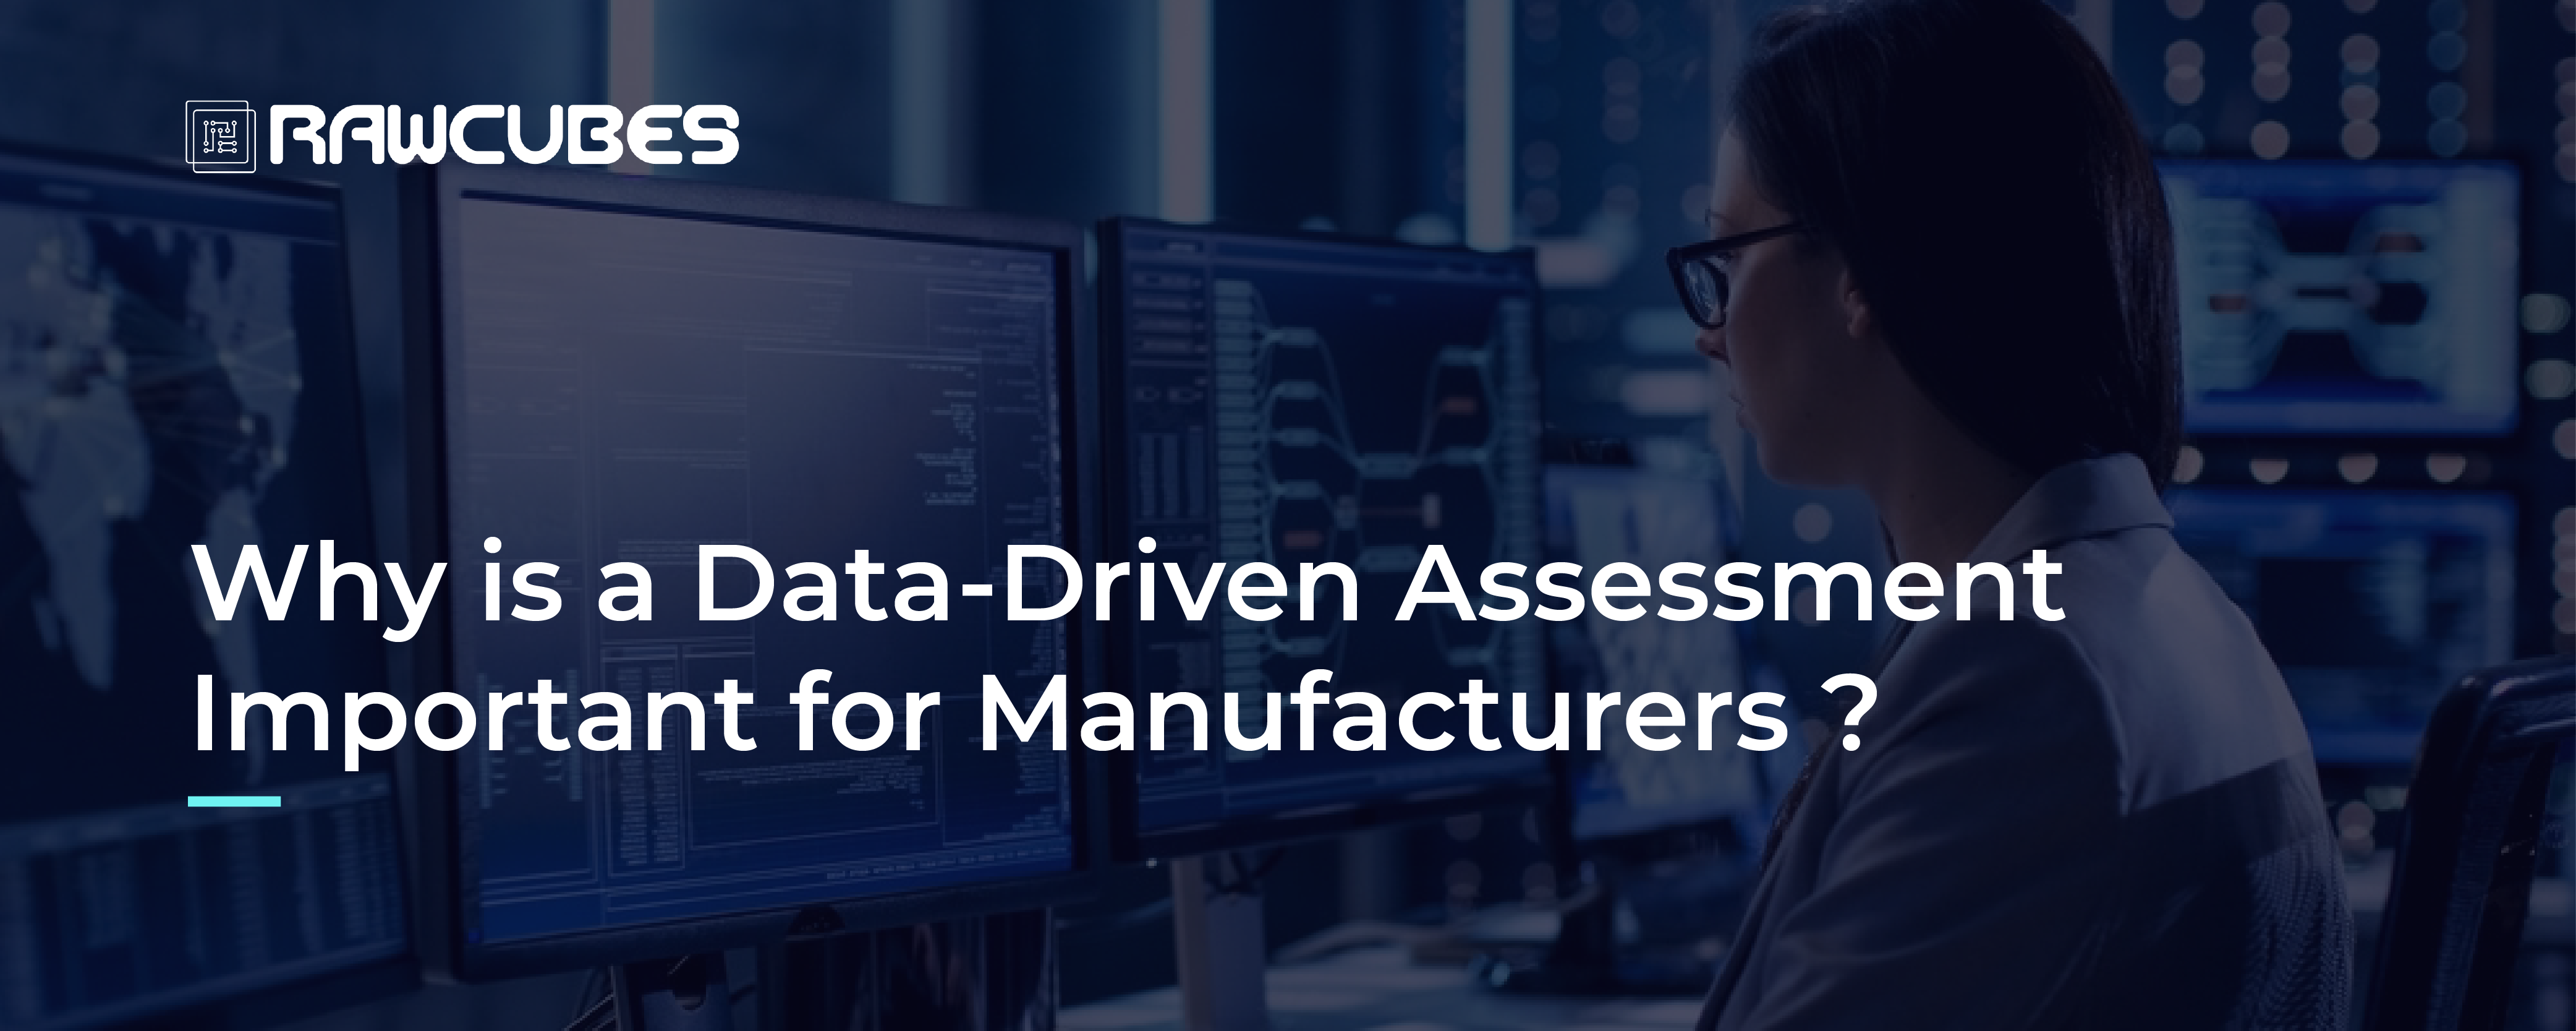 why is a data-driven assessment important for manufacturers